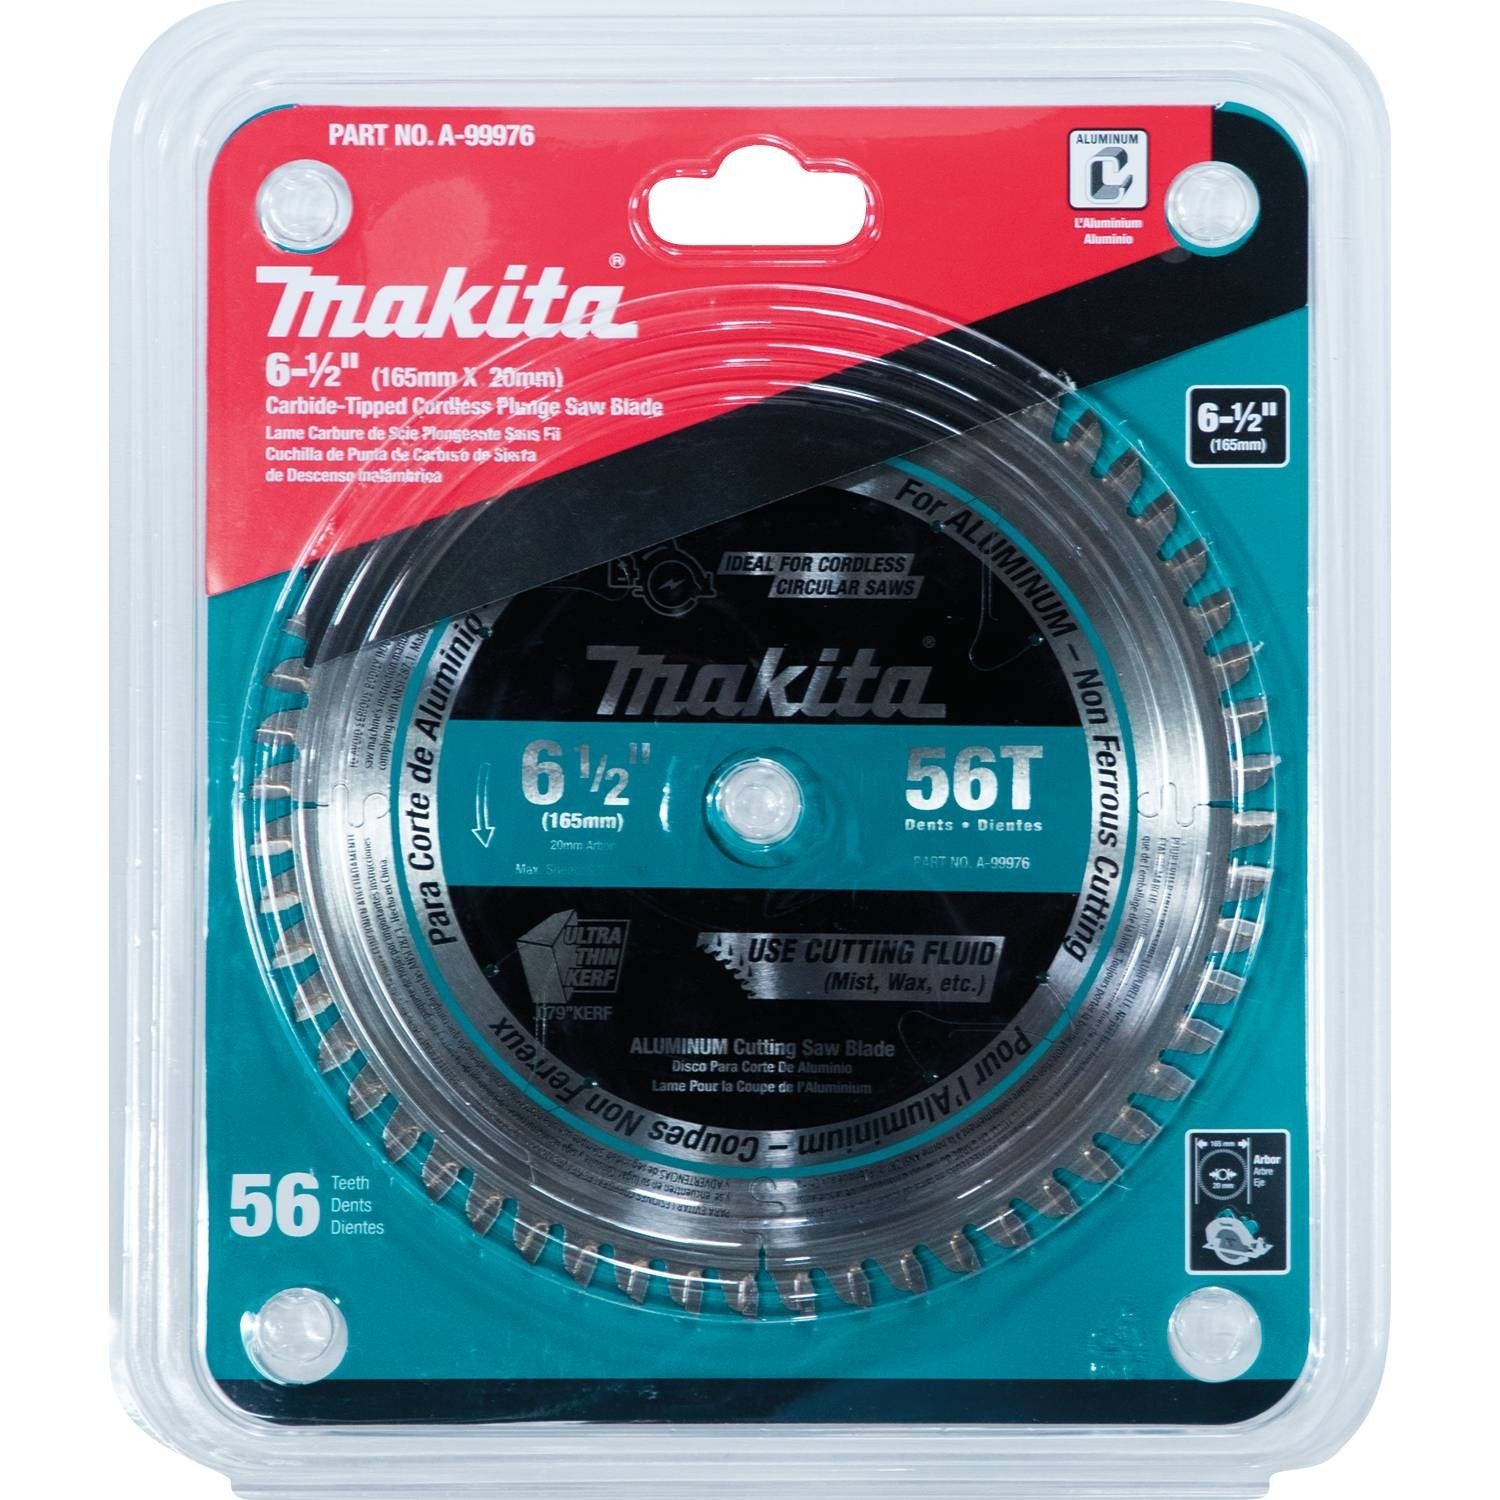 Makita A-99976 6-1/2" 56T Carbide-Tipped Cordless Plunge Saw Blade